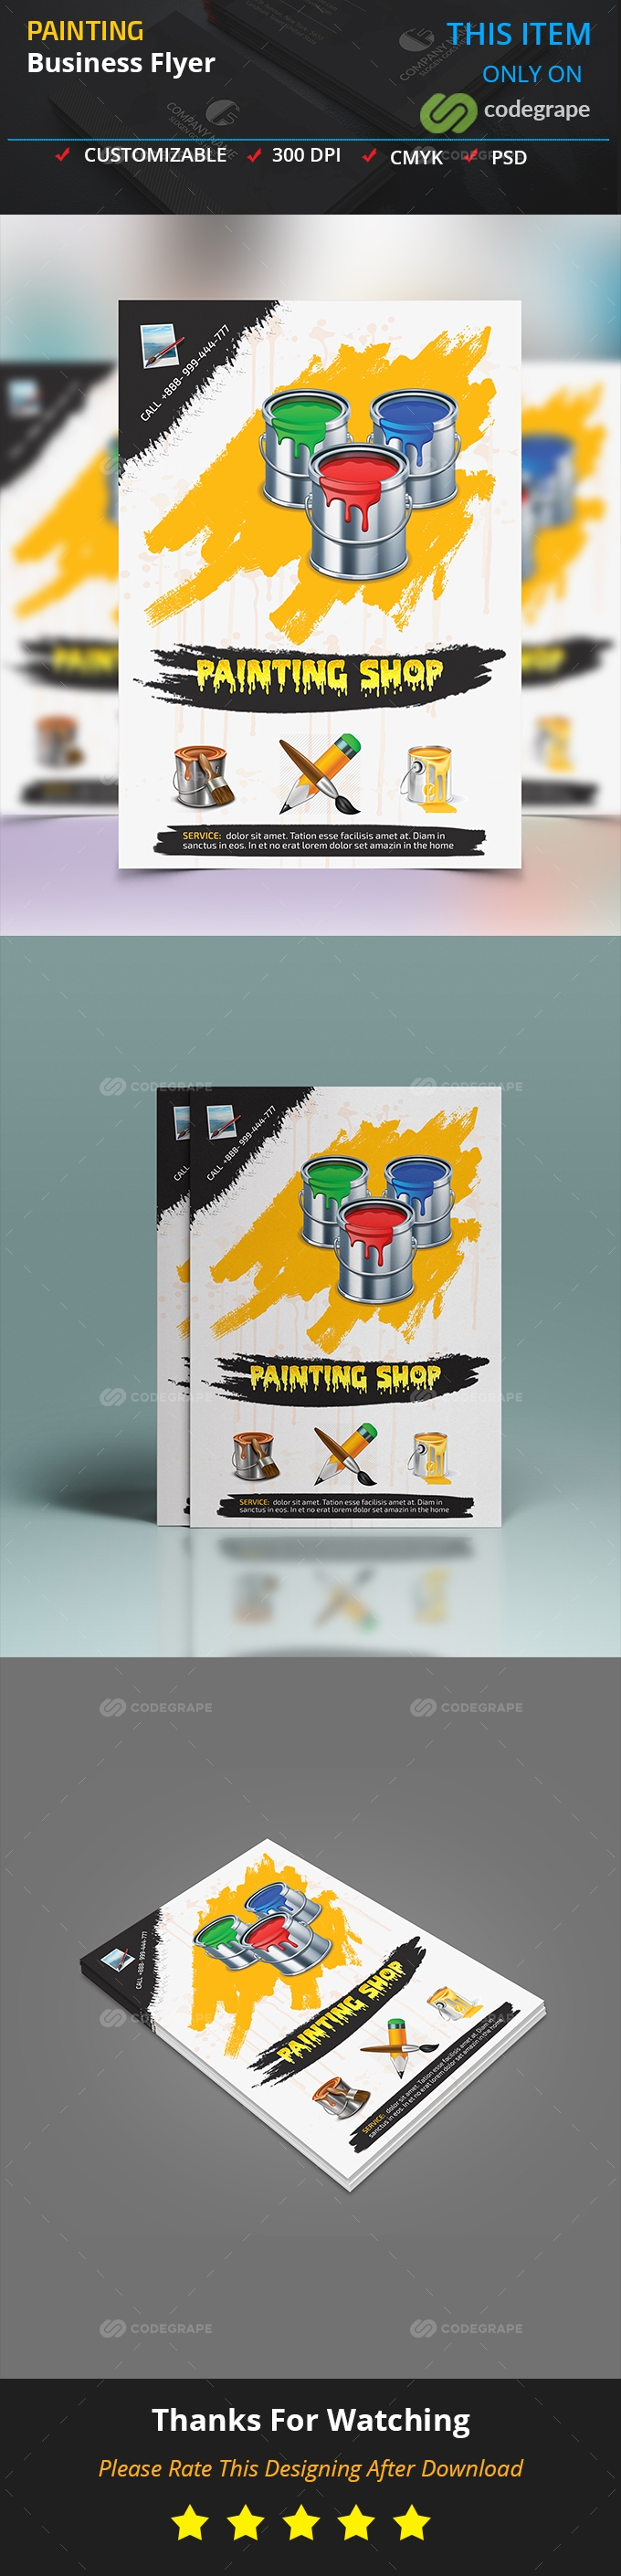 Painting Business Flyer